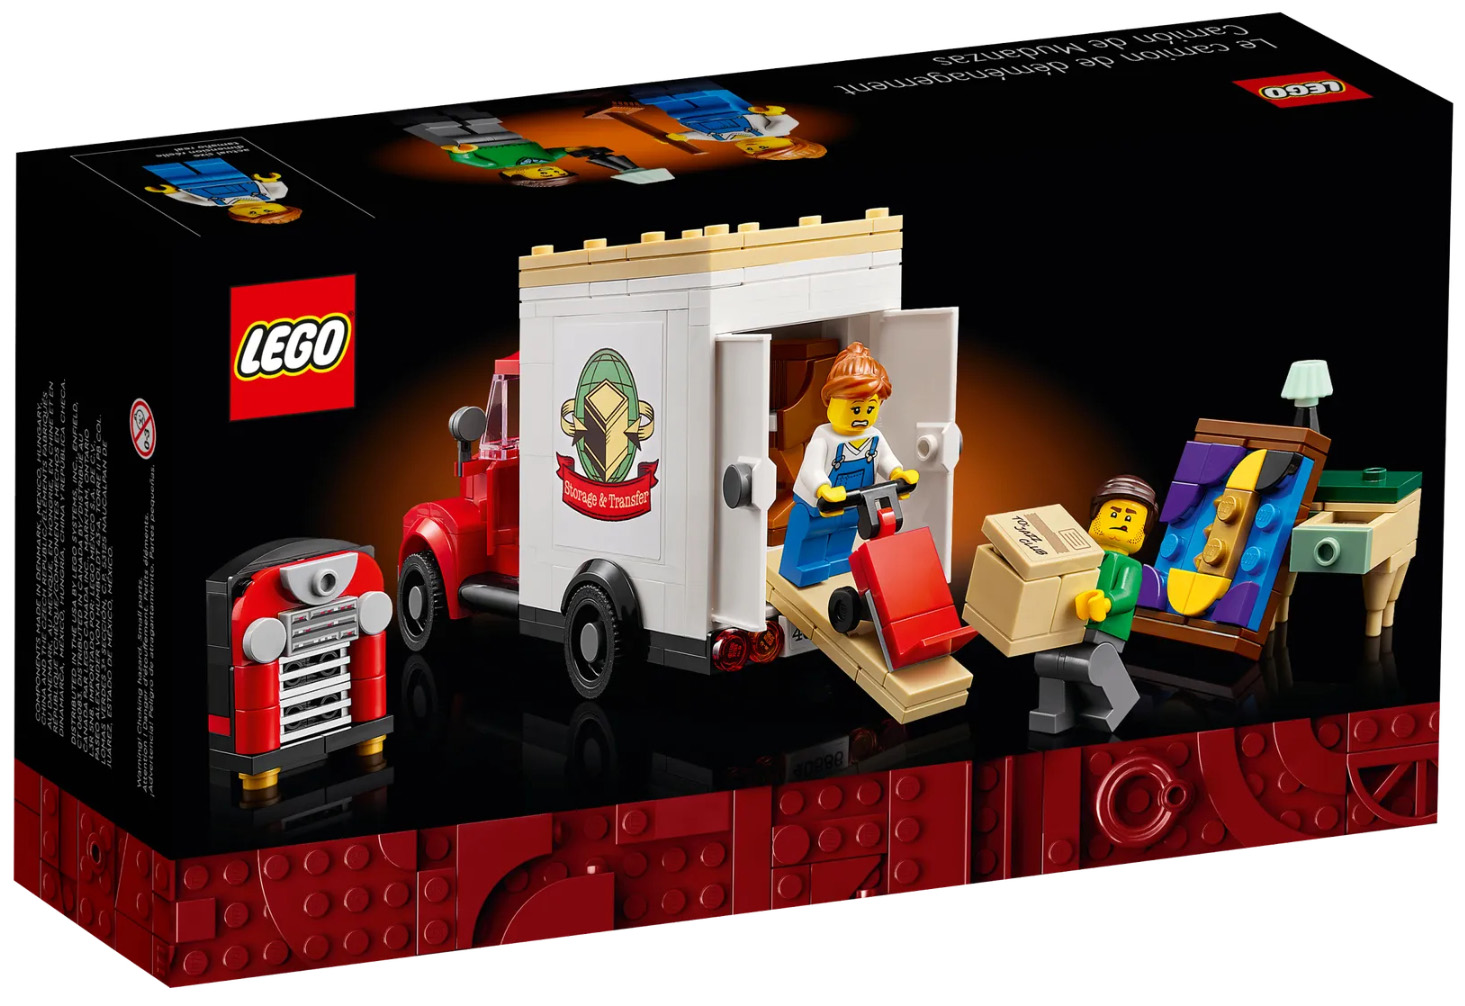 40586 Moving Truck LEGO (R) ICONS GWP New Set Officially Revealed